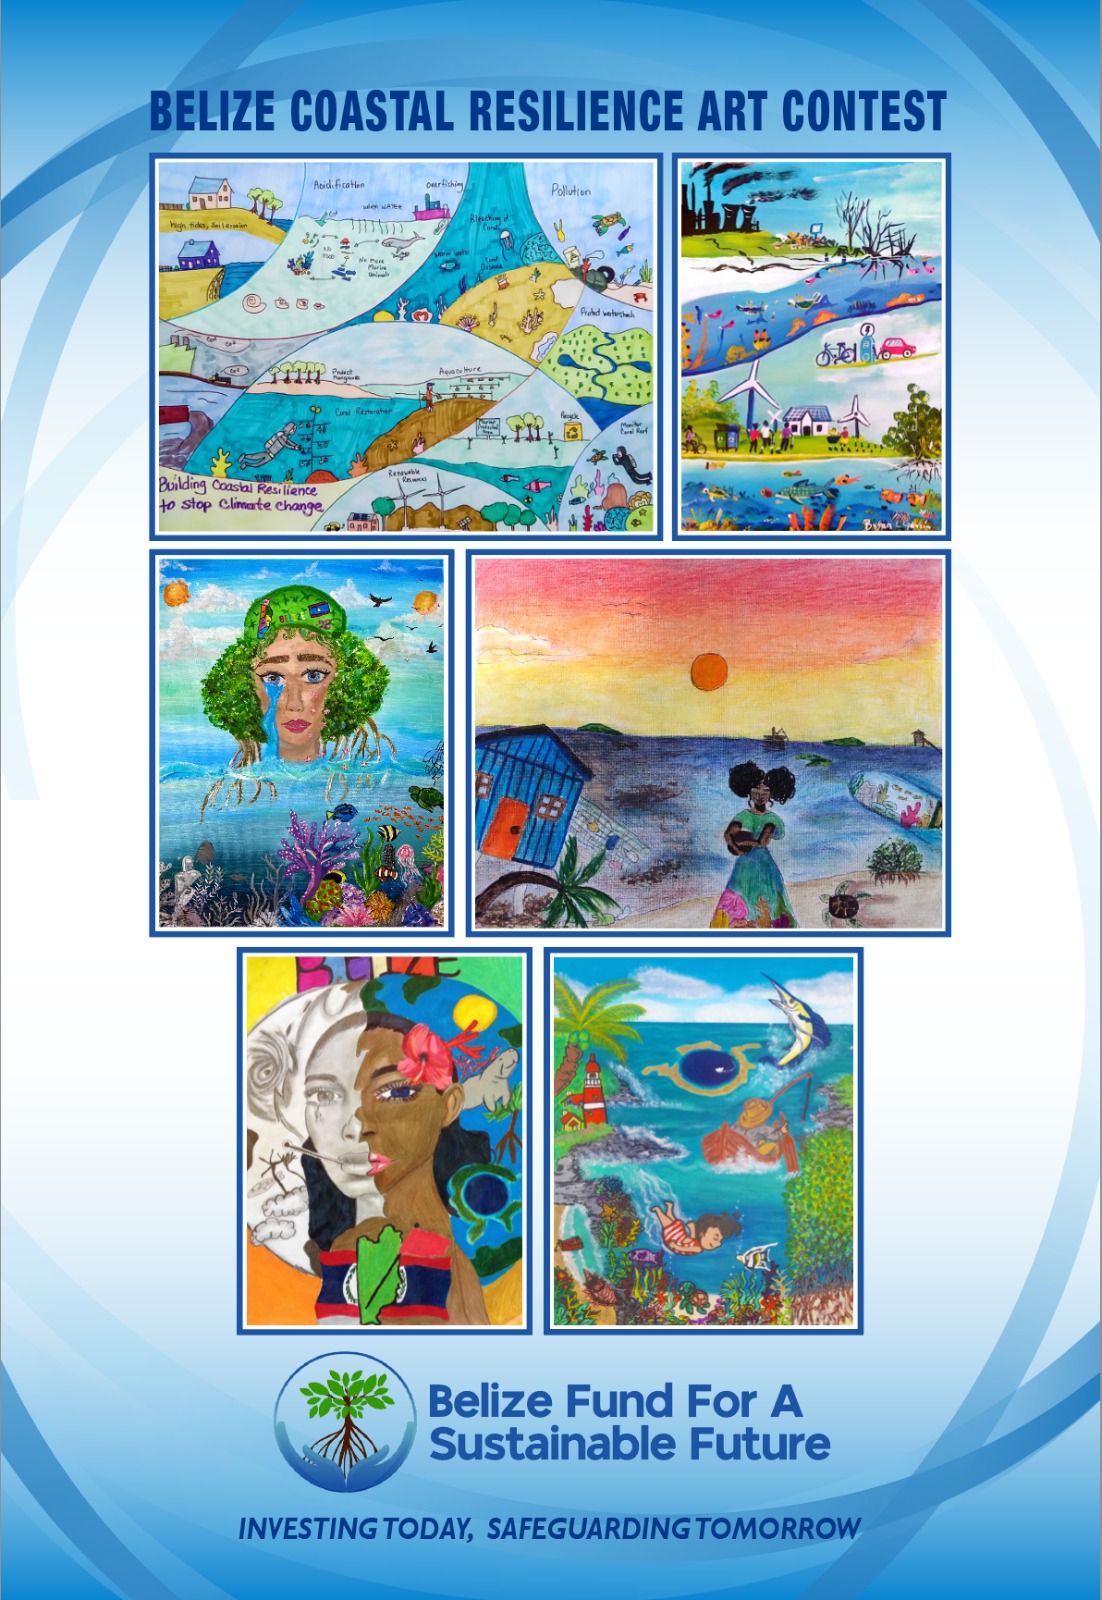 Winners Announced for the Belize Coastal Resilience Art Contest in celebration of International Day of Climate Action 